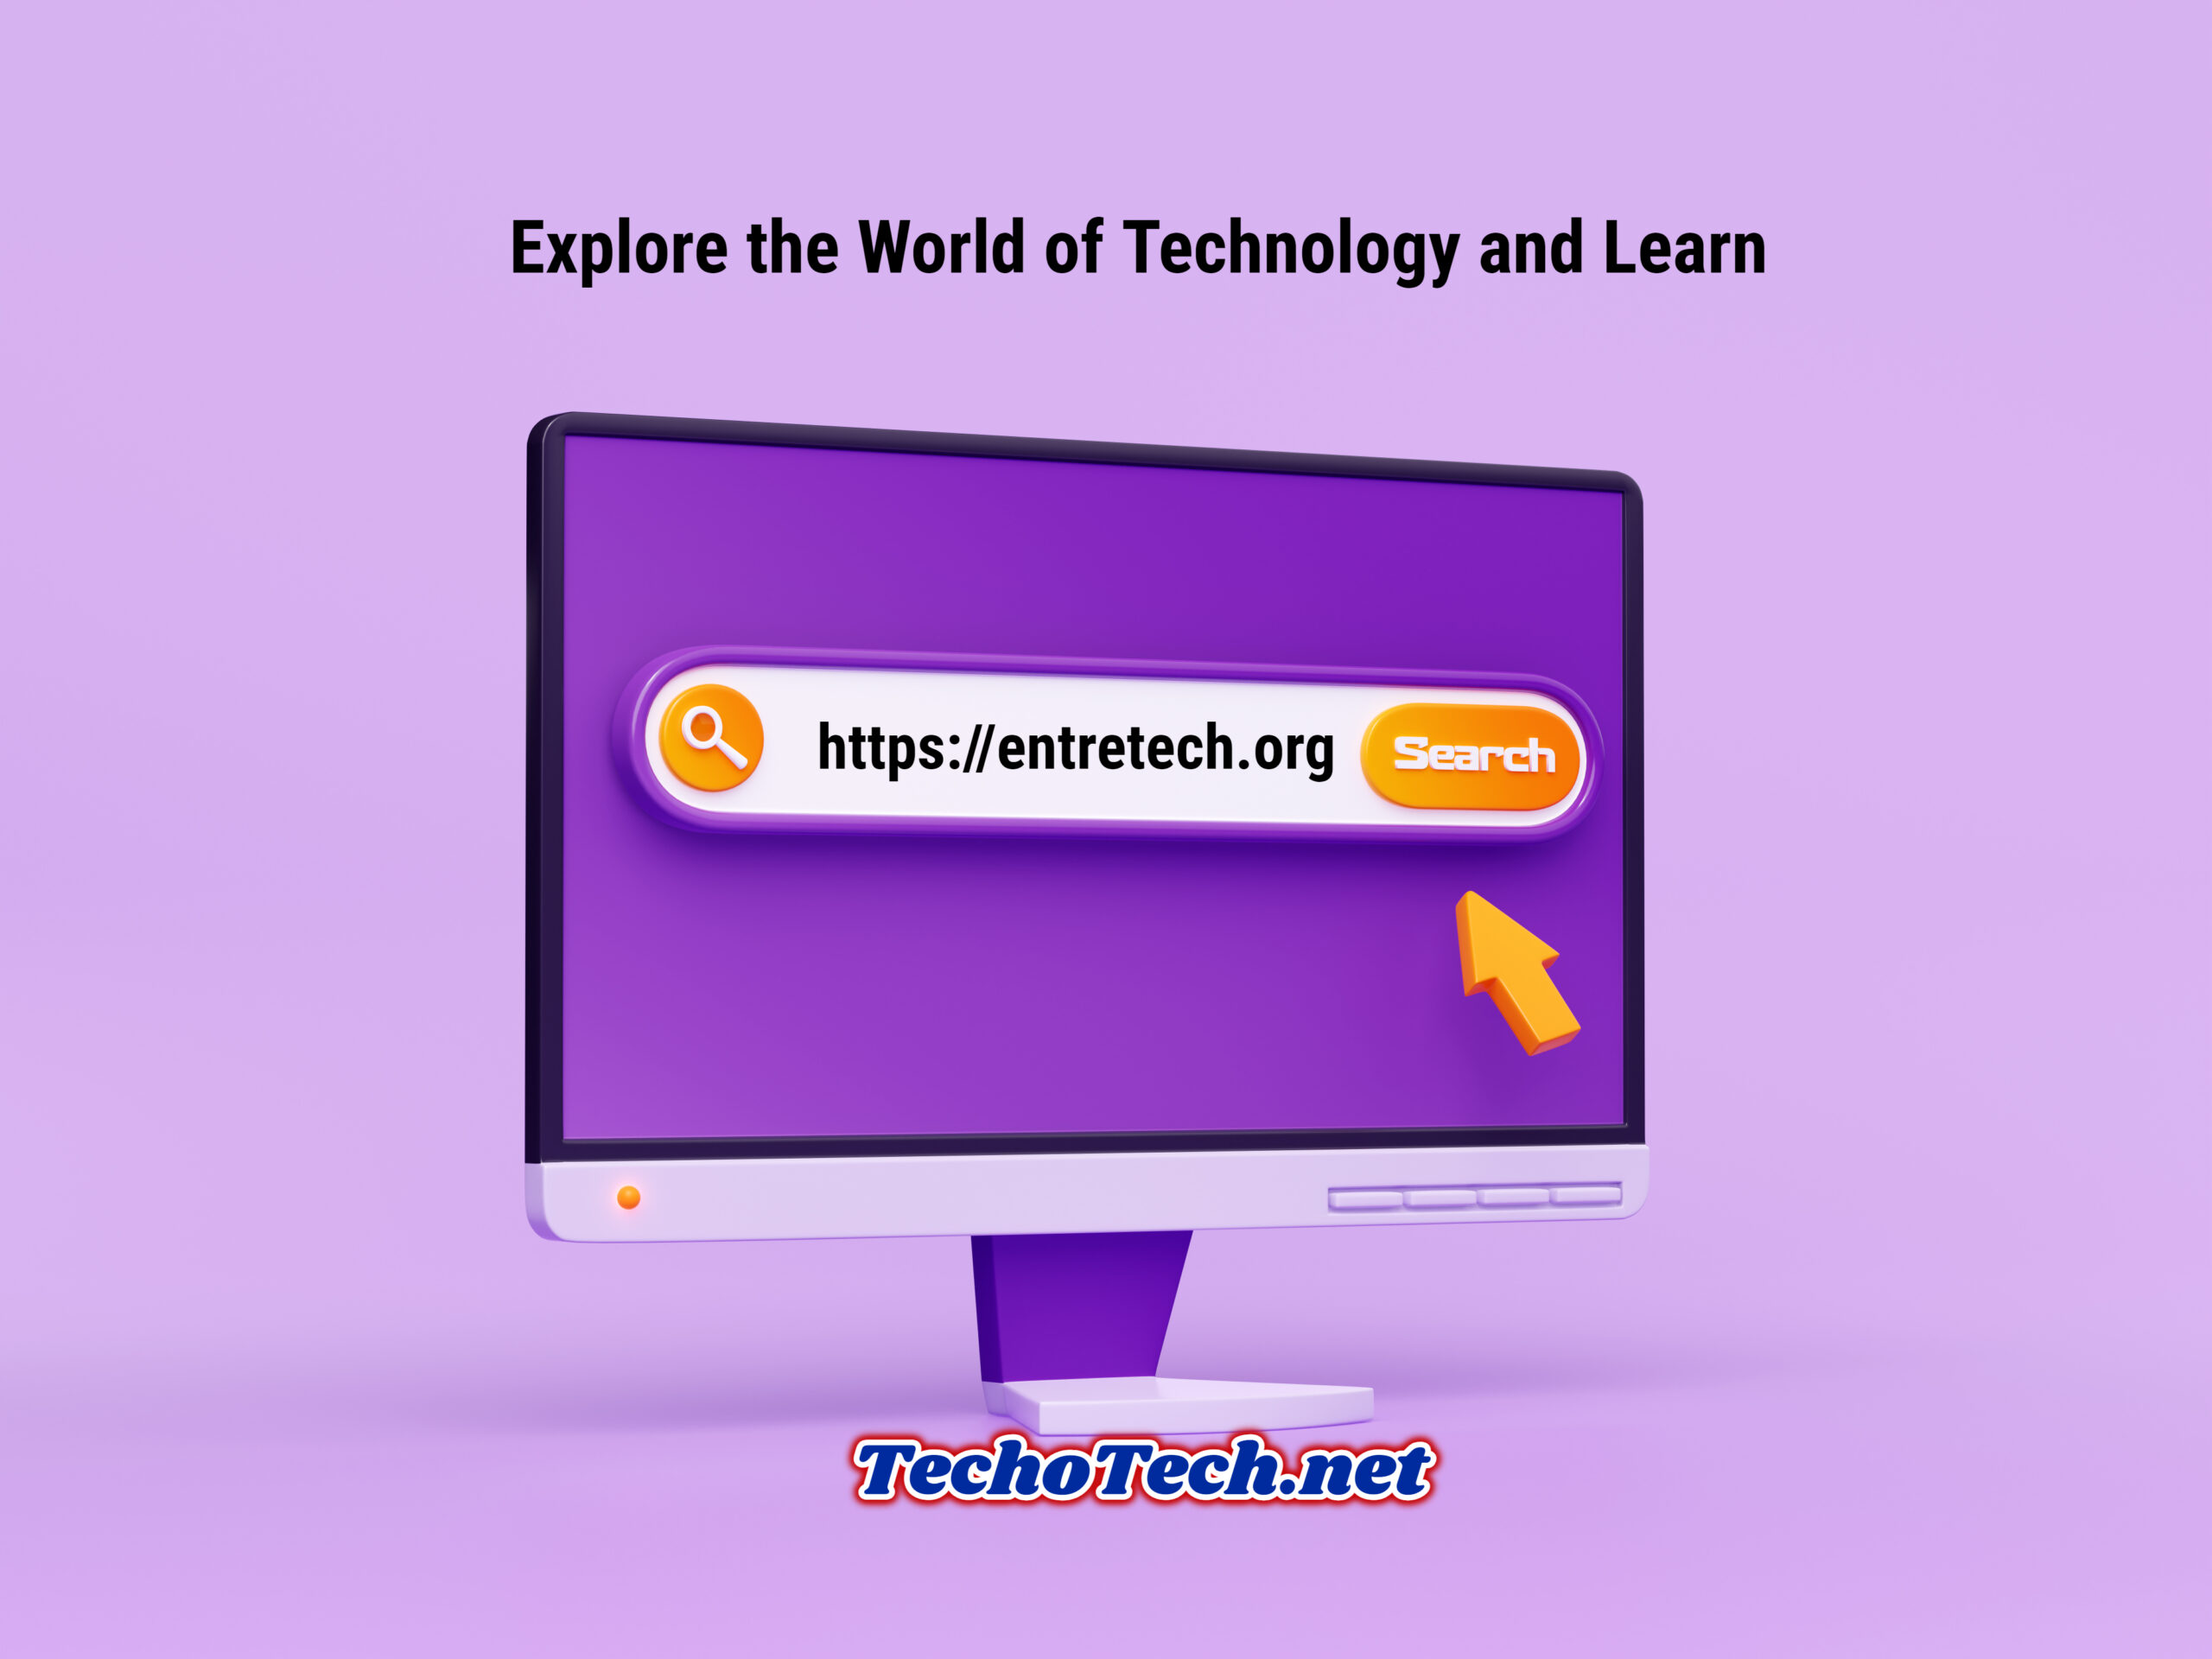 https://entretech.org: Explore the World of Technology and Learn